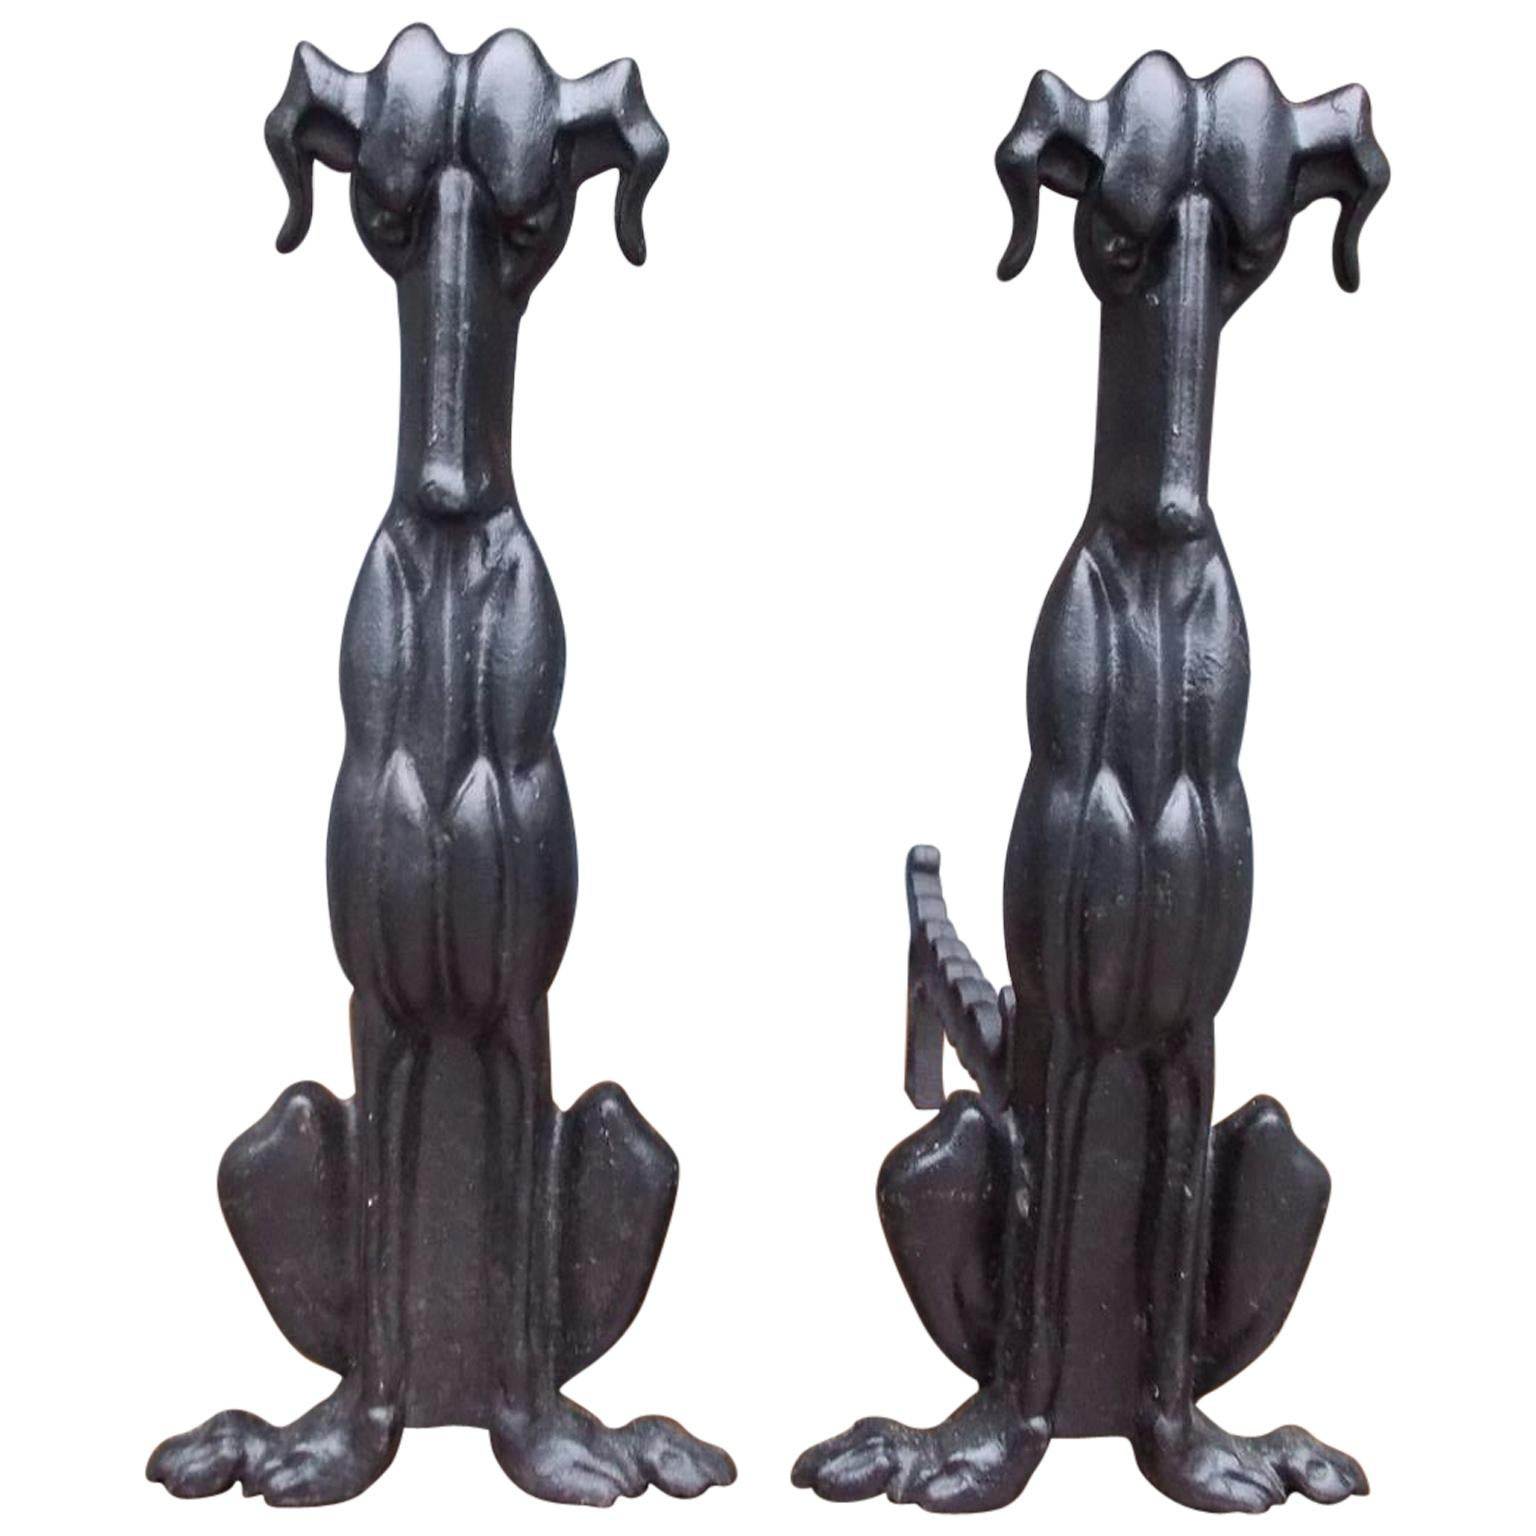 Pair of American Art Deco Cast Iron Sporting Dog Andirons with Rear Legs C. 1900